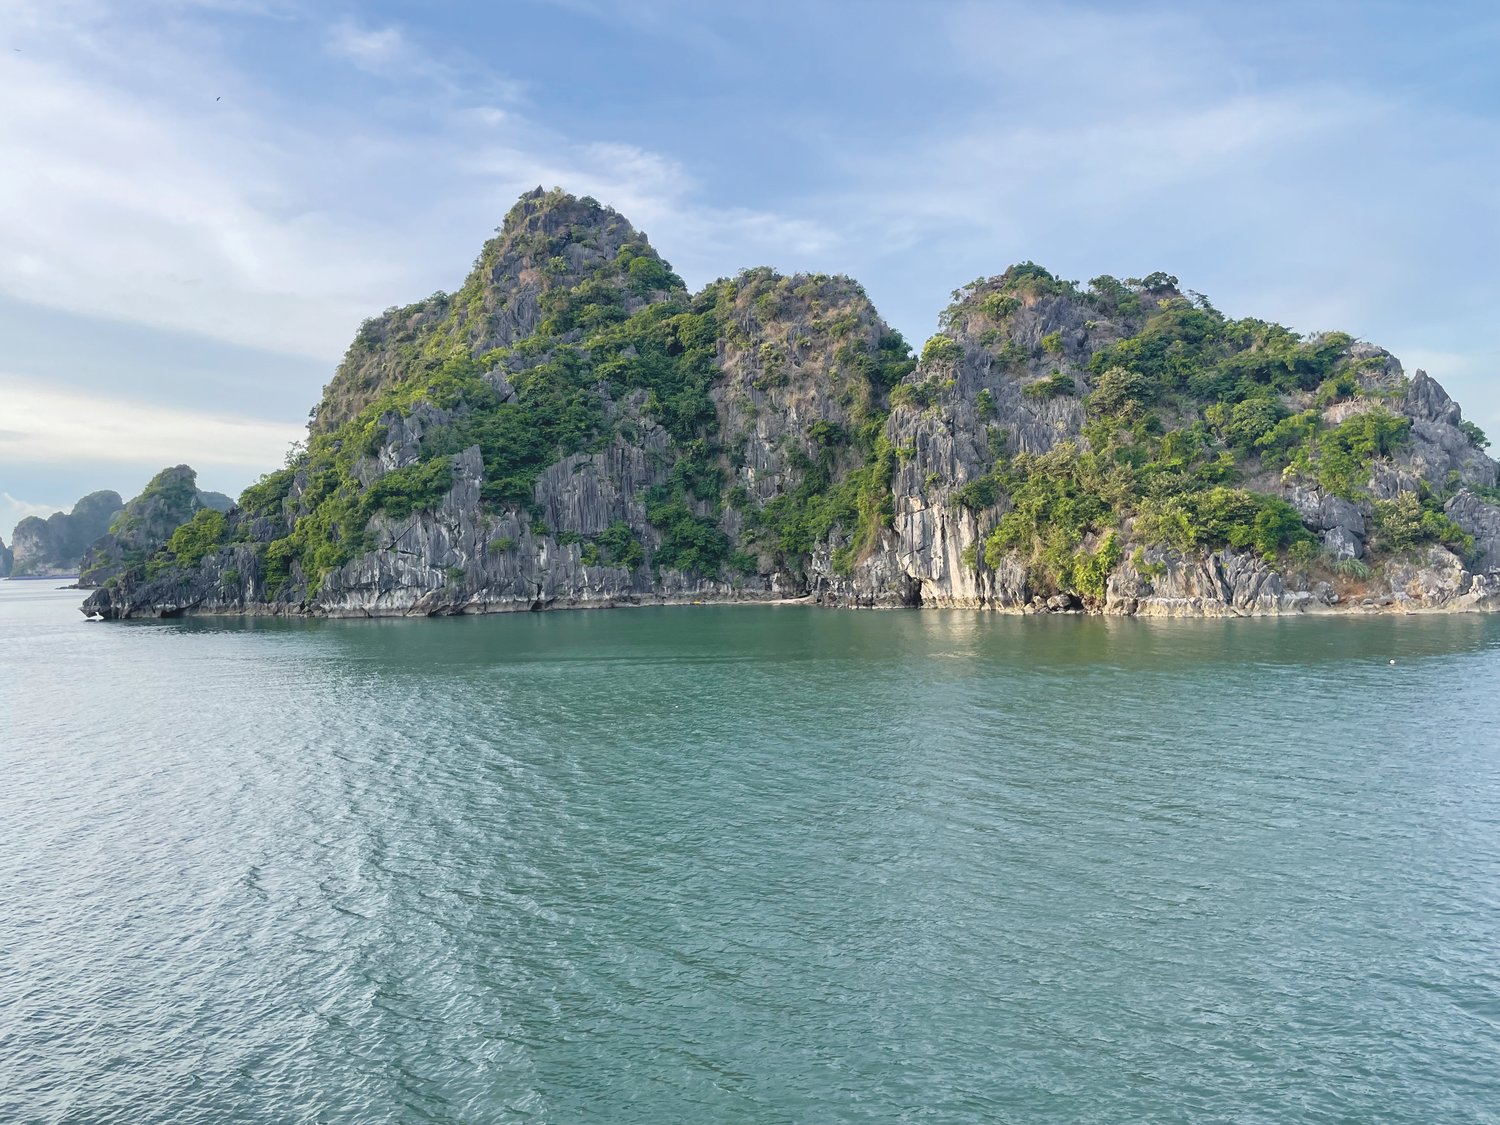 The first night of the Vingroup Elite Vietnam tour, guests were invited aboard a dinner cruise around Ha Long Bay. The bay features a series of grass covered mountains protruding from the sea and is designated as an UNESCO World Heritage Site.